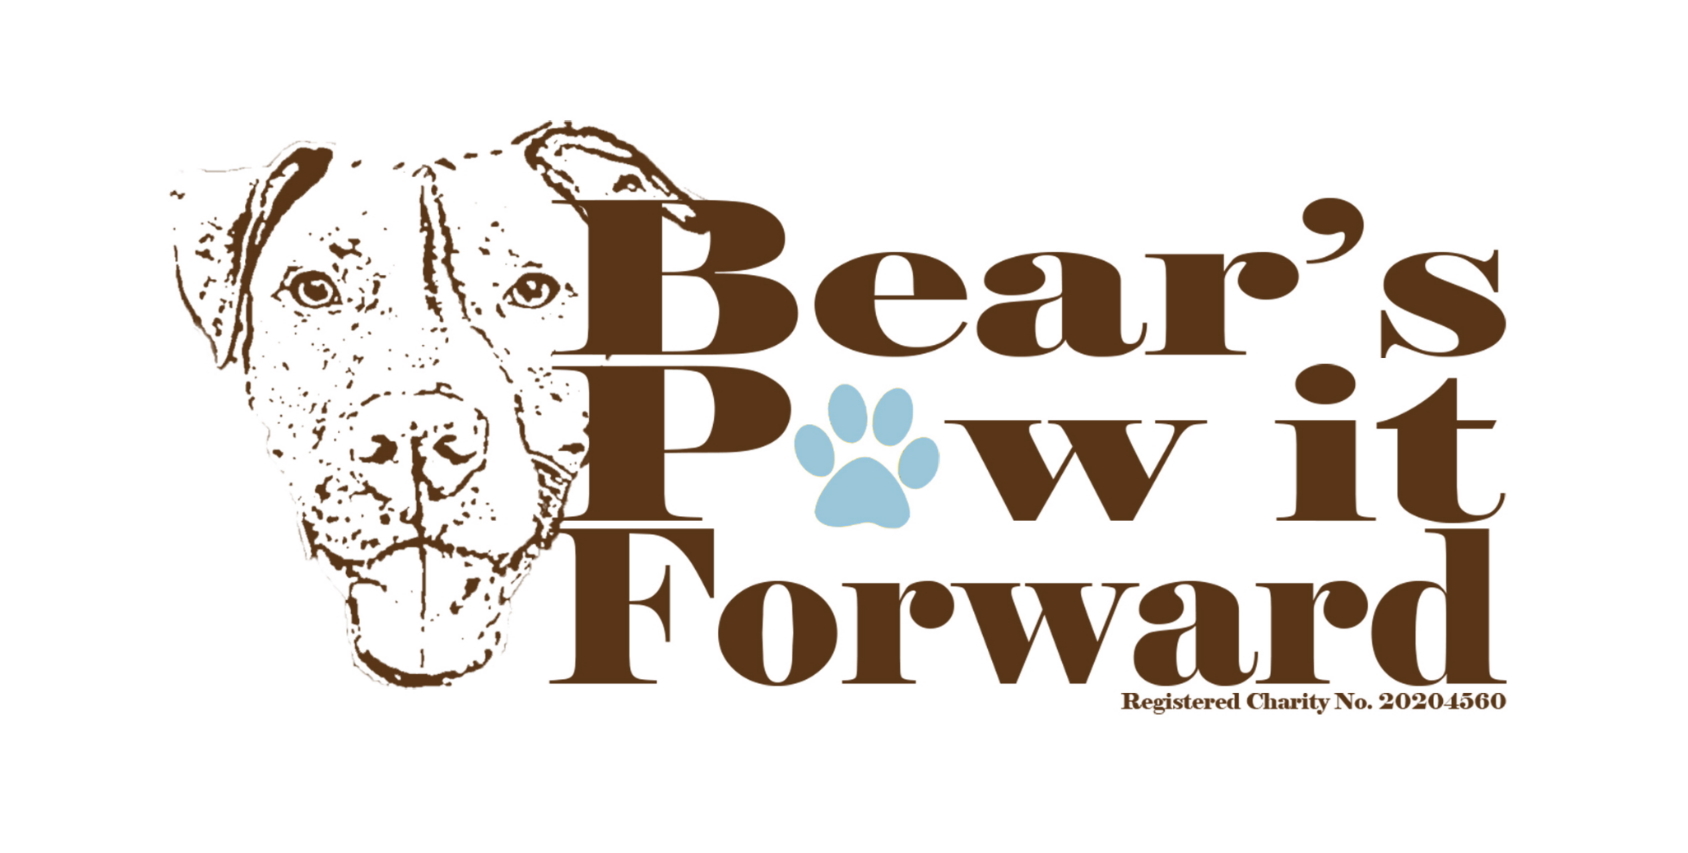 PAW will be supporting Bear's Paw it Forward